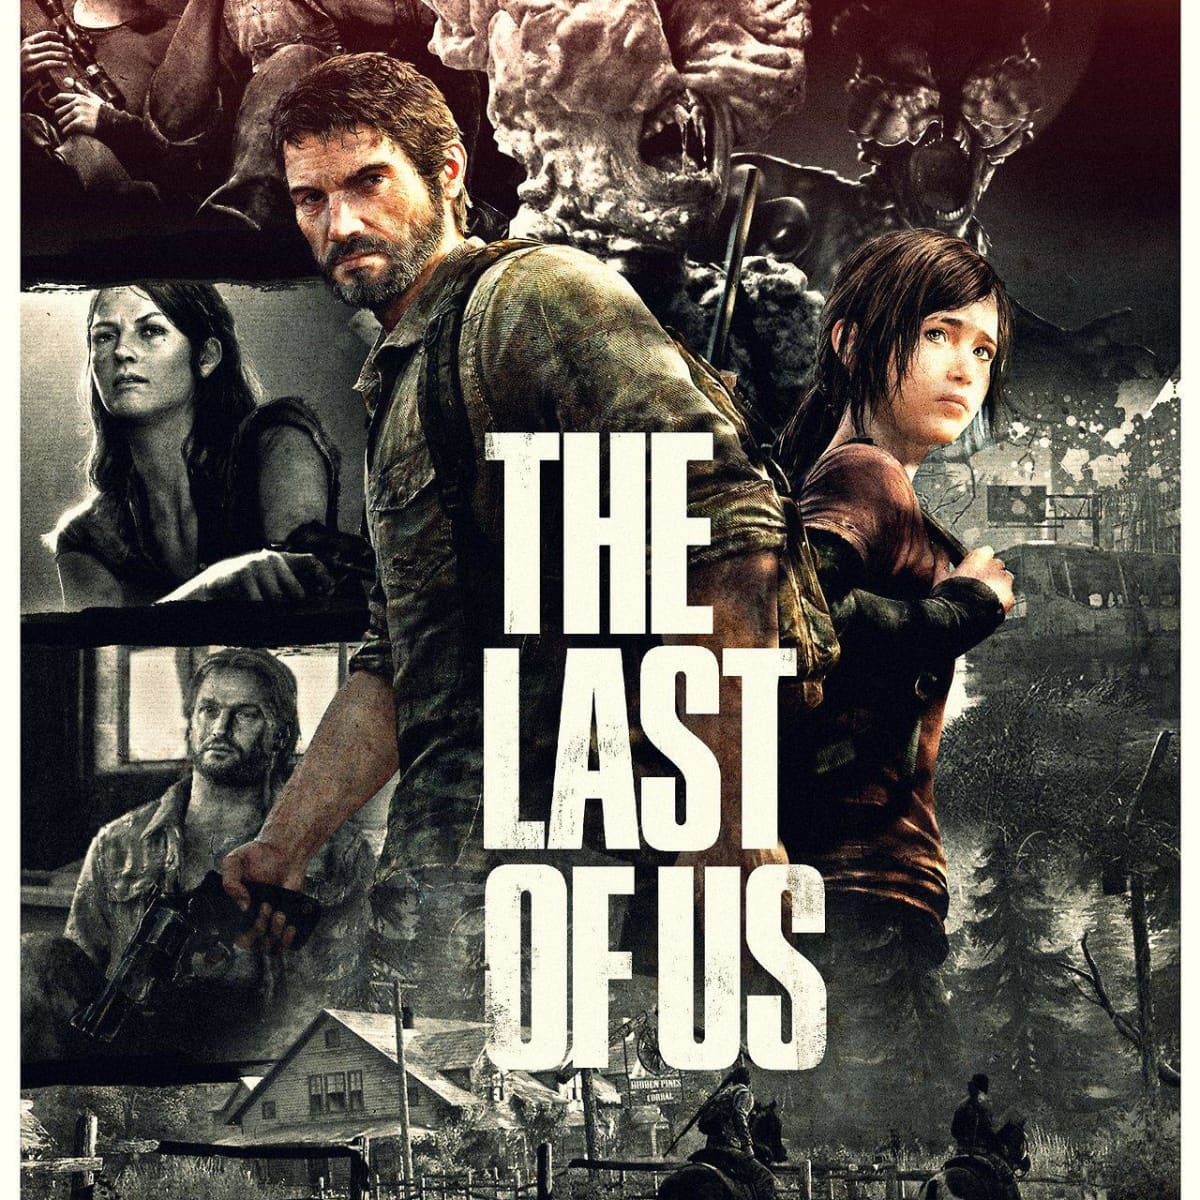 TCMFGames on X: Last of Us inspired open world survival horror